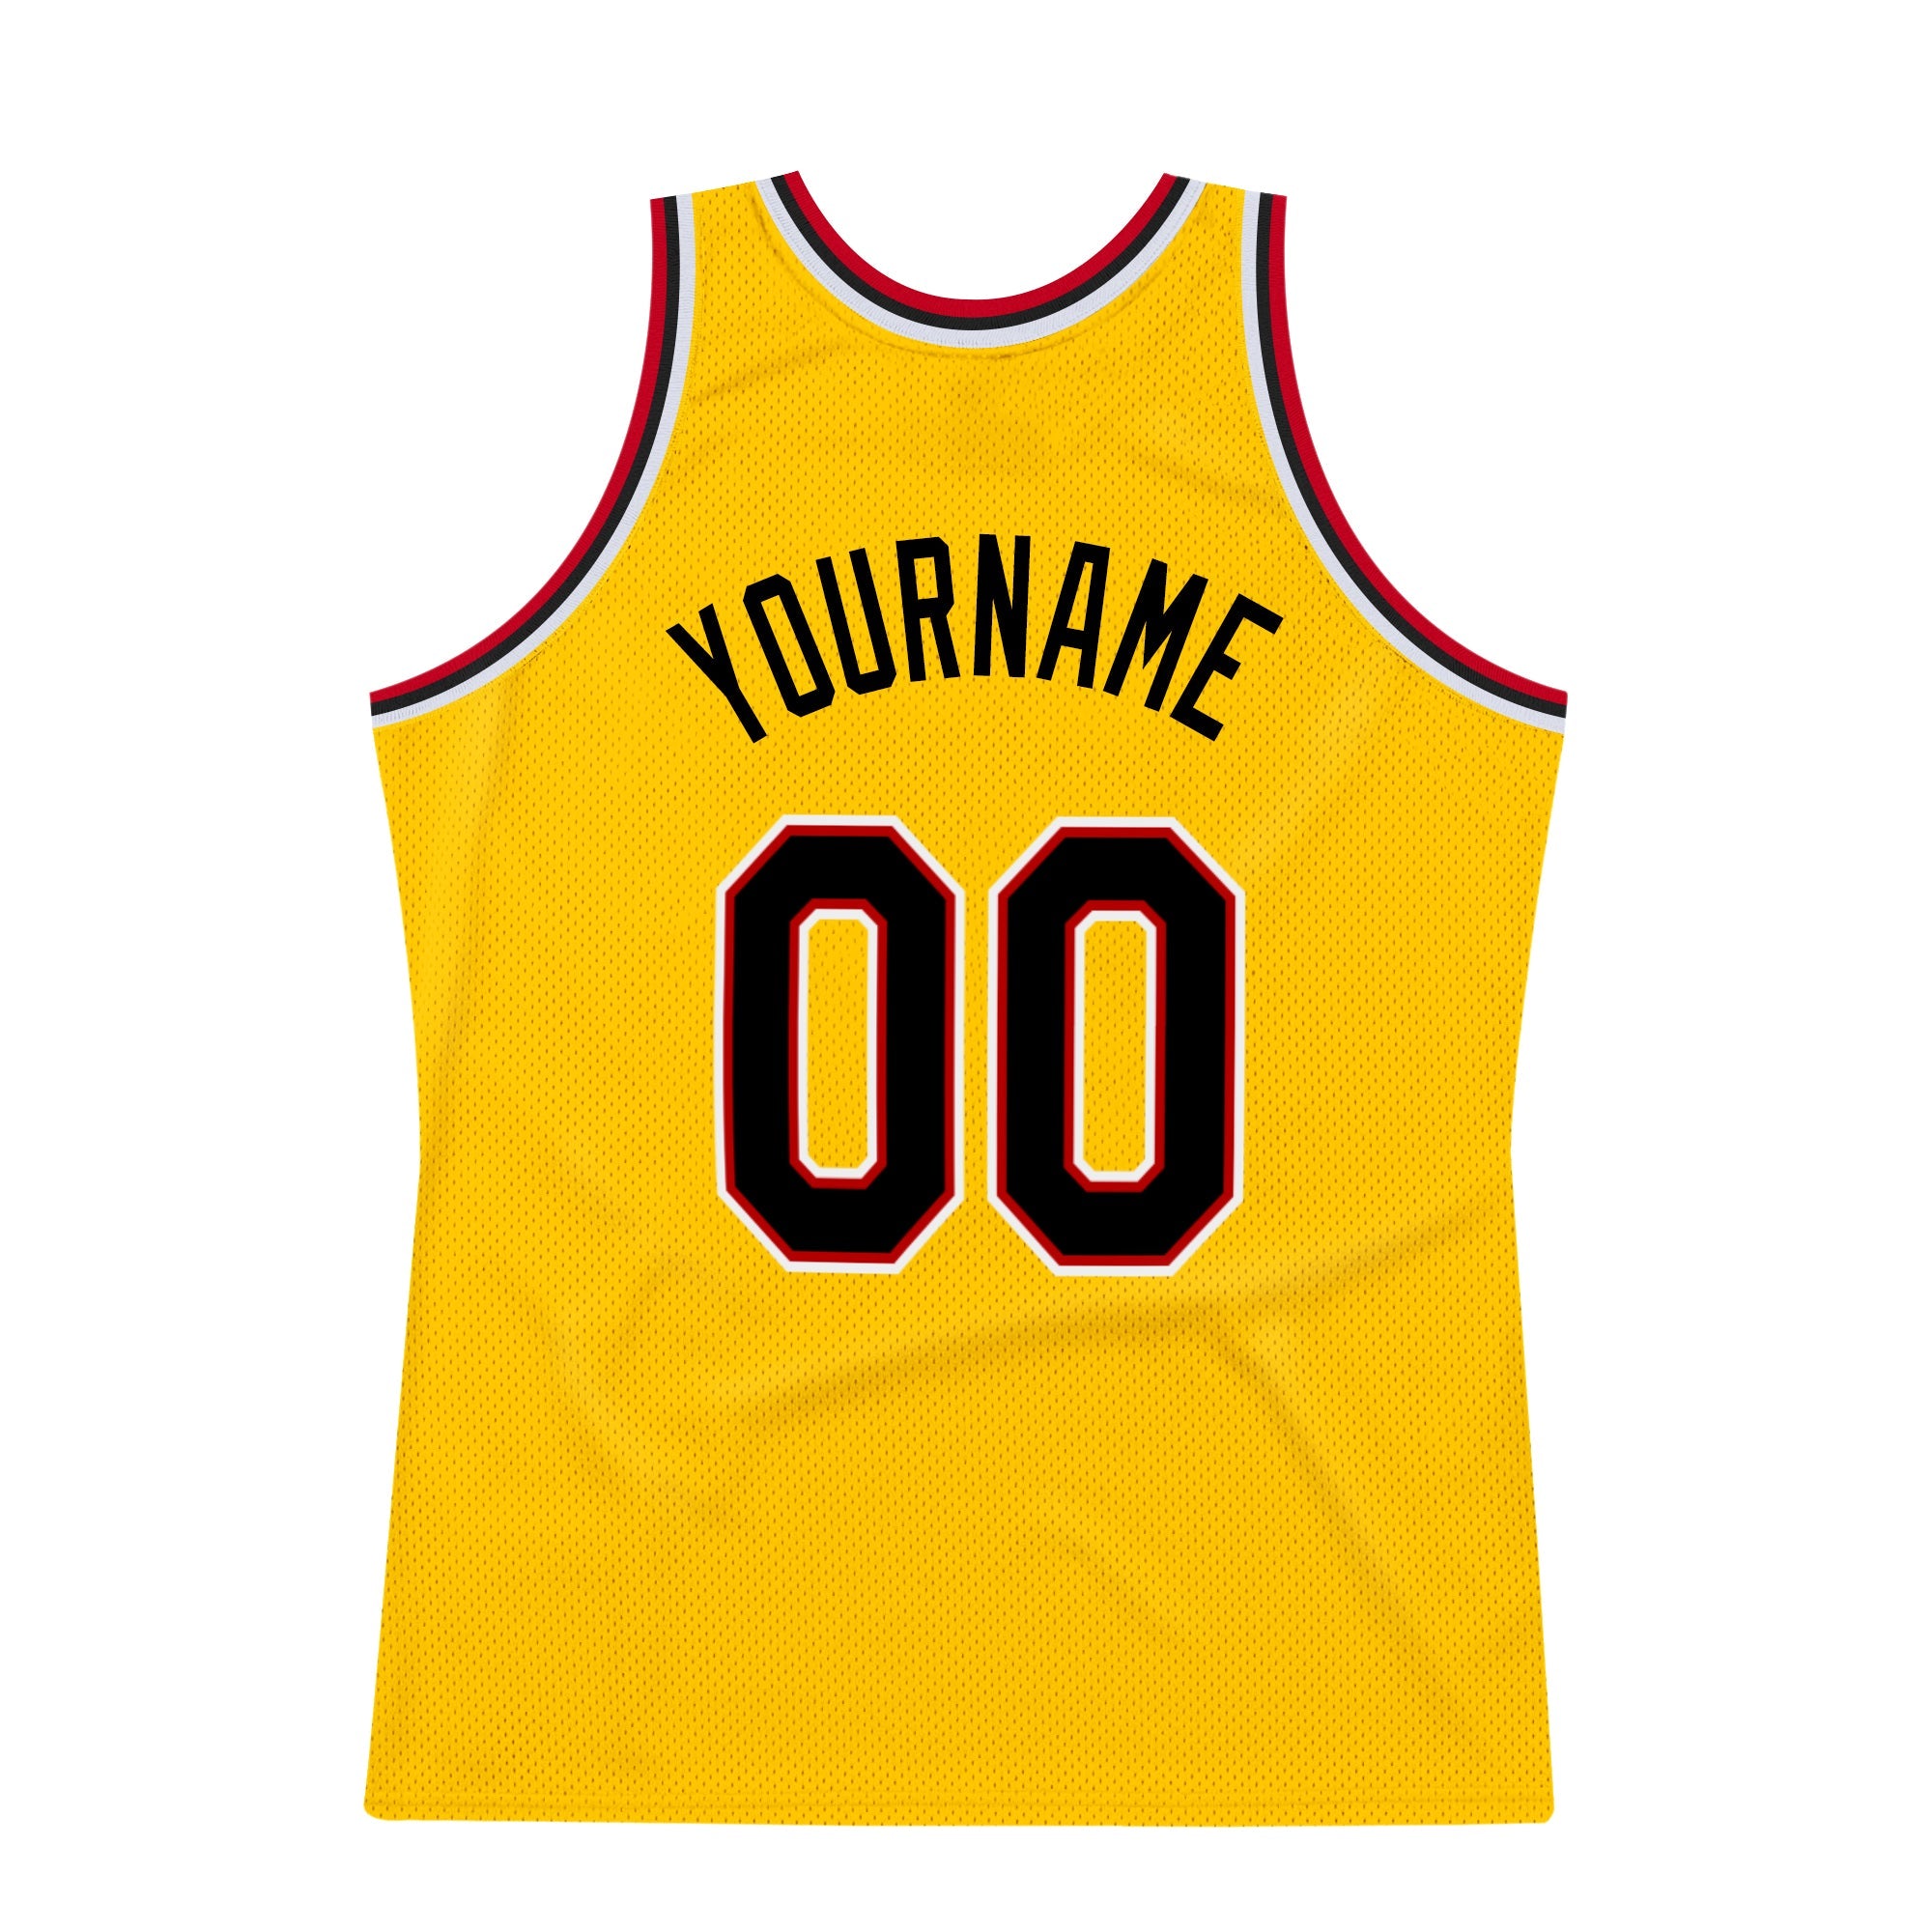 Custom Gold Black-Red Authentic Throwback Basketball Jersey